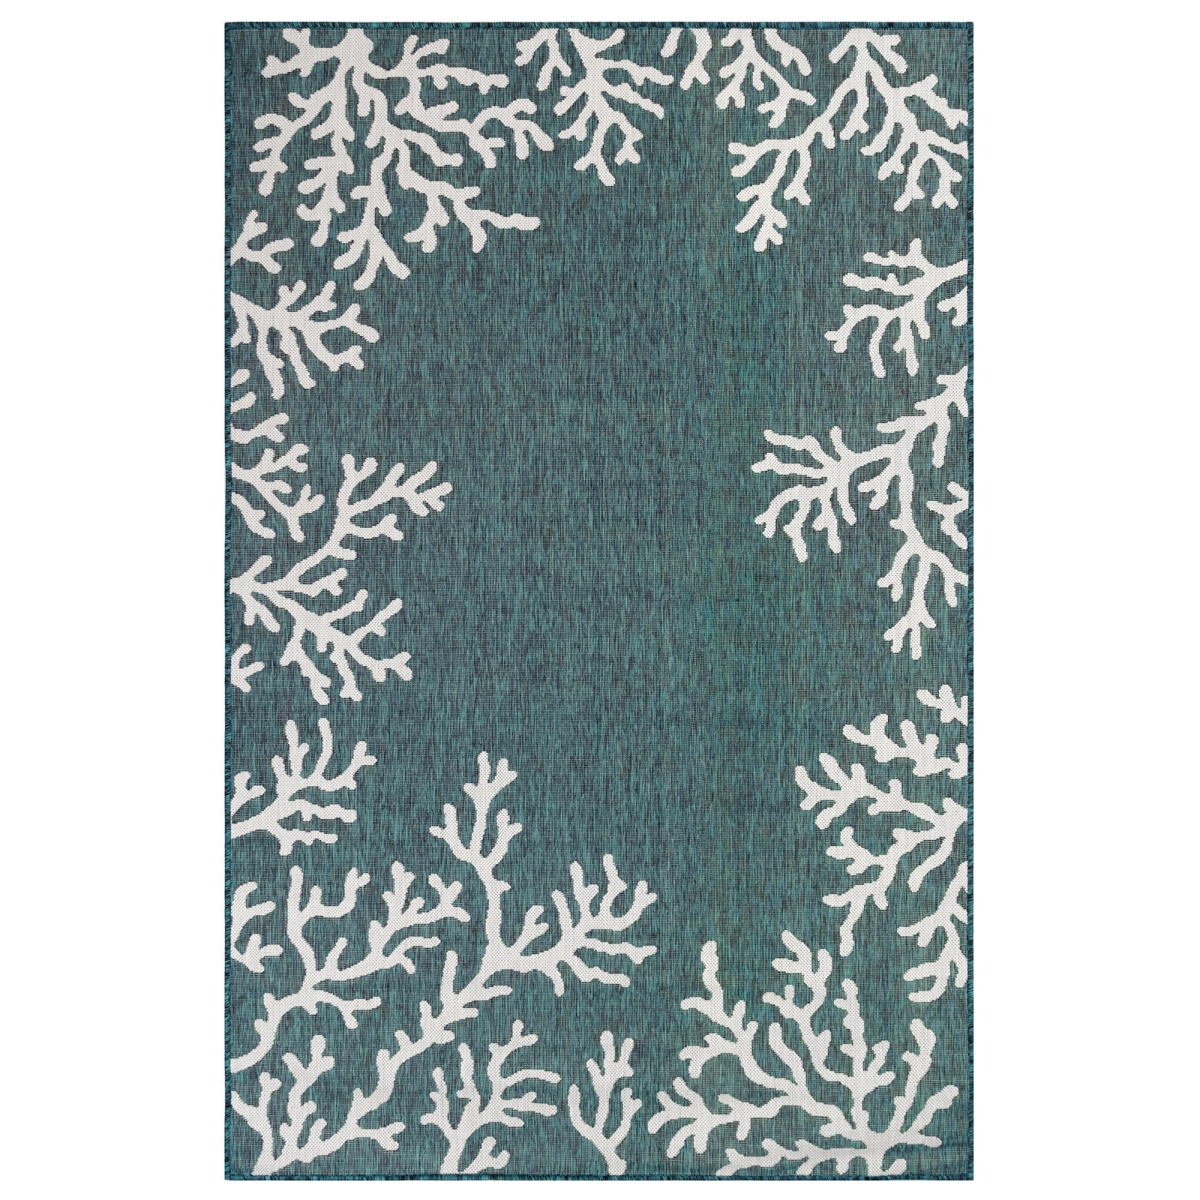 Cre45844894 Liora Manne Carmel Coral Border Indoor & Outdoor Rug, Teal - 39 X 59 In.